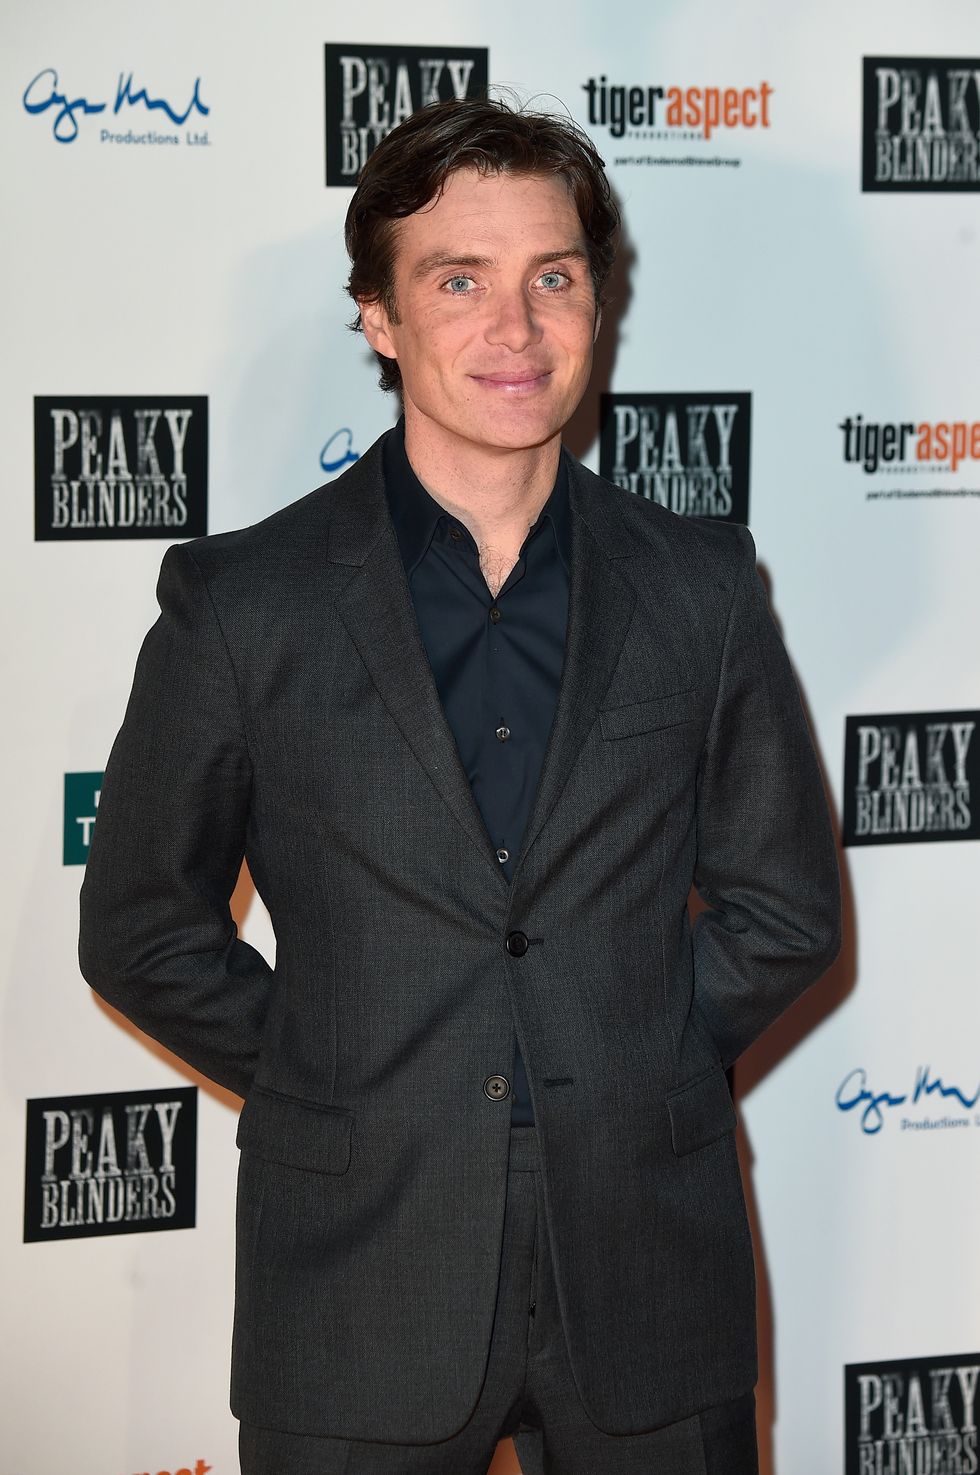 What Is Cillian Murphy’s In discovering Price?